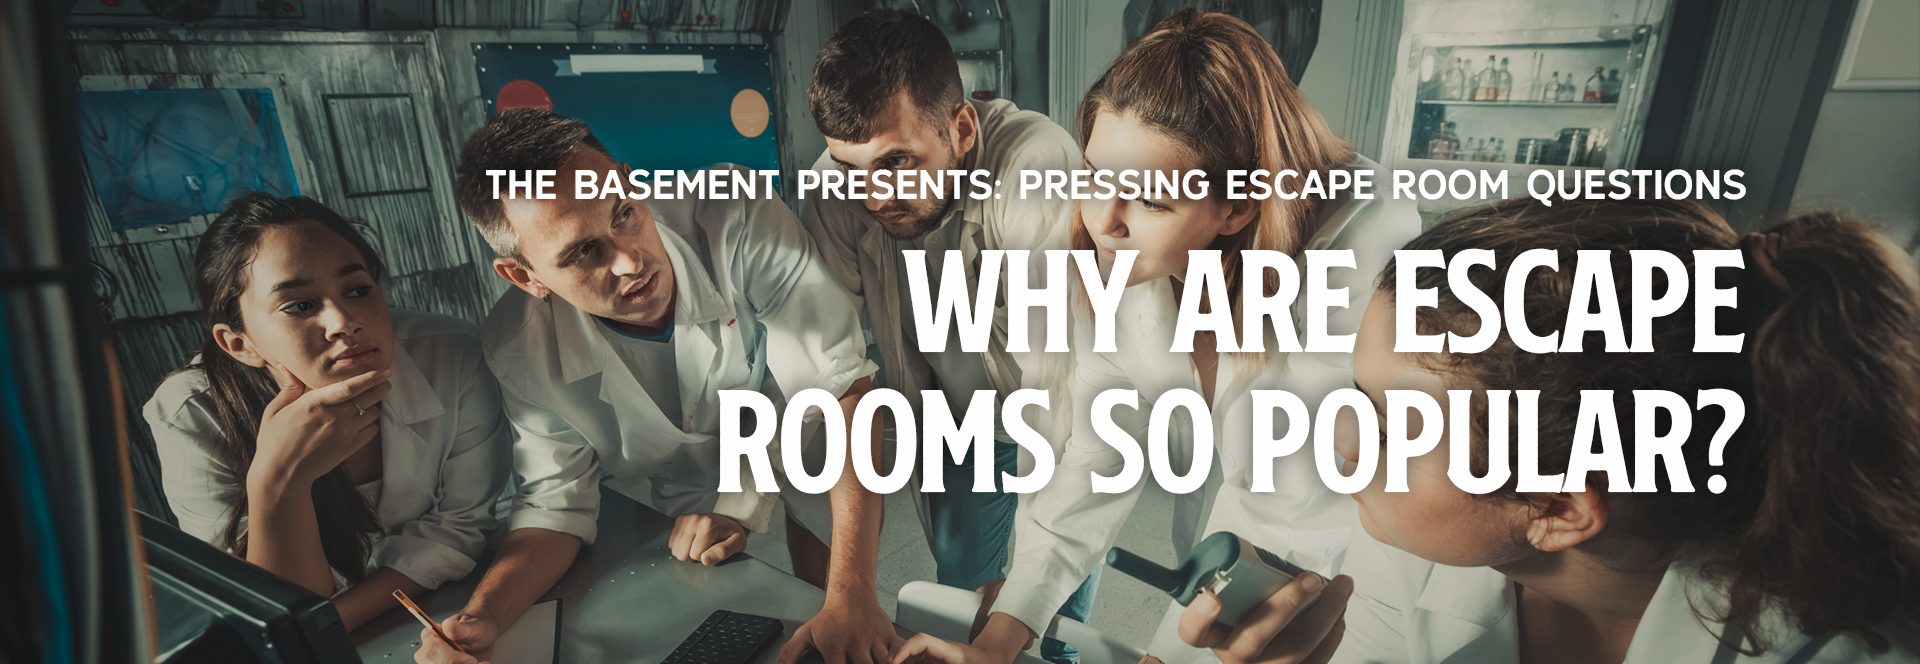 Why Are Escape Rooms So Popular